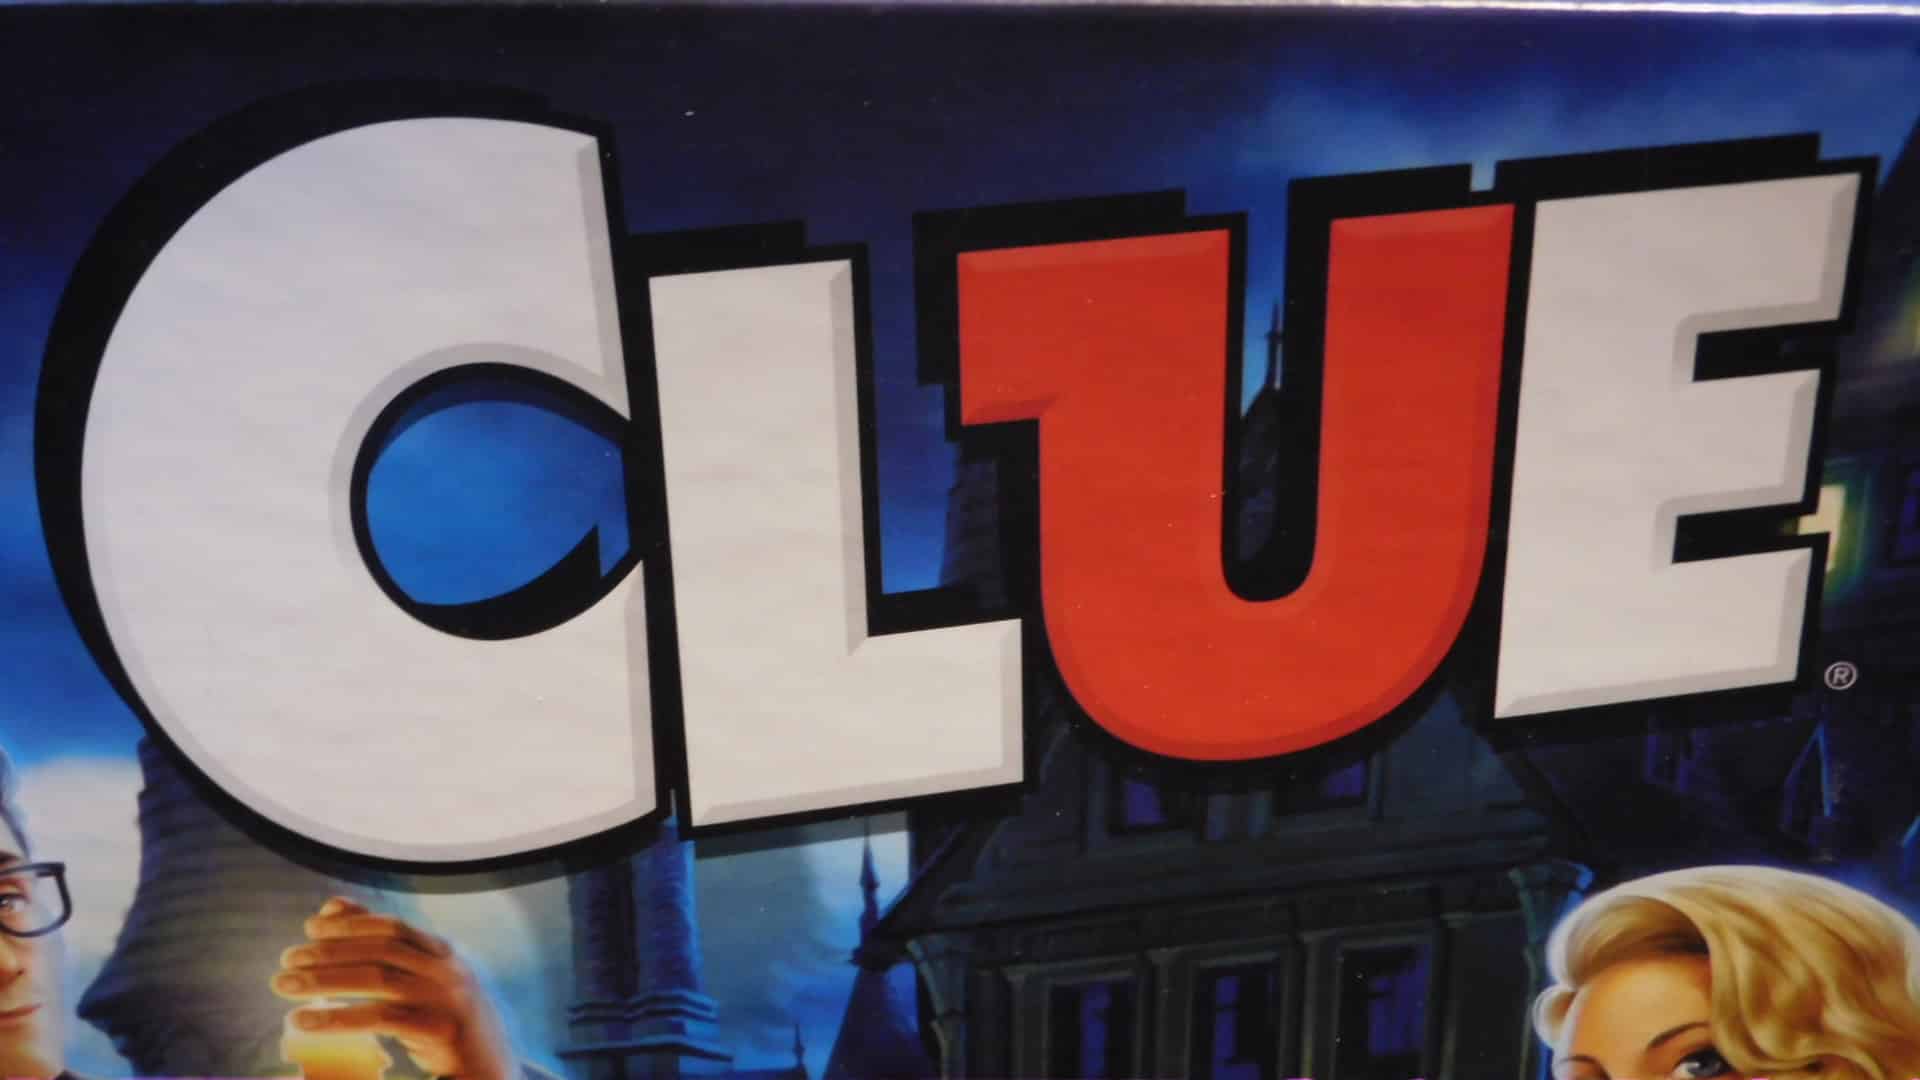 A closeup of the word, "Clue" on the box cover of the same game.